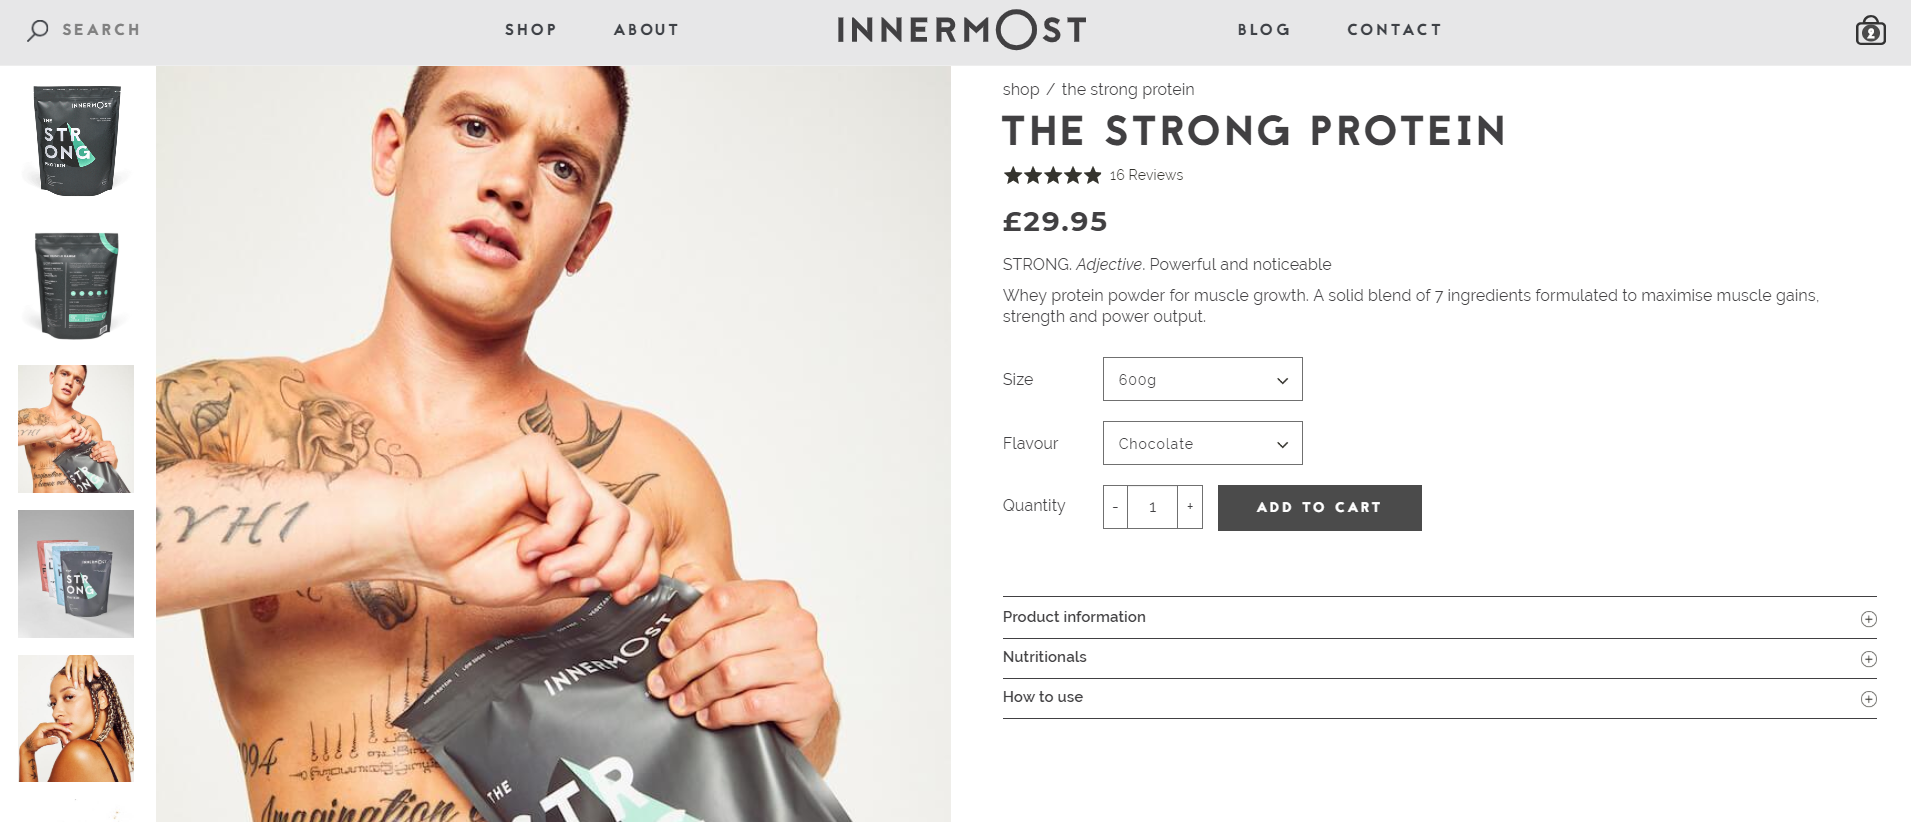 A screenshot of an Innermost product page on their Shopify Plus ecommerce store.